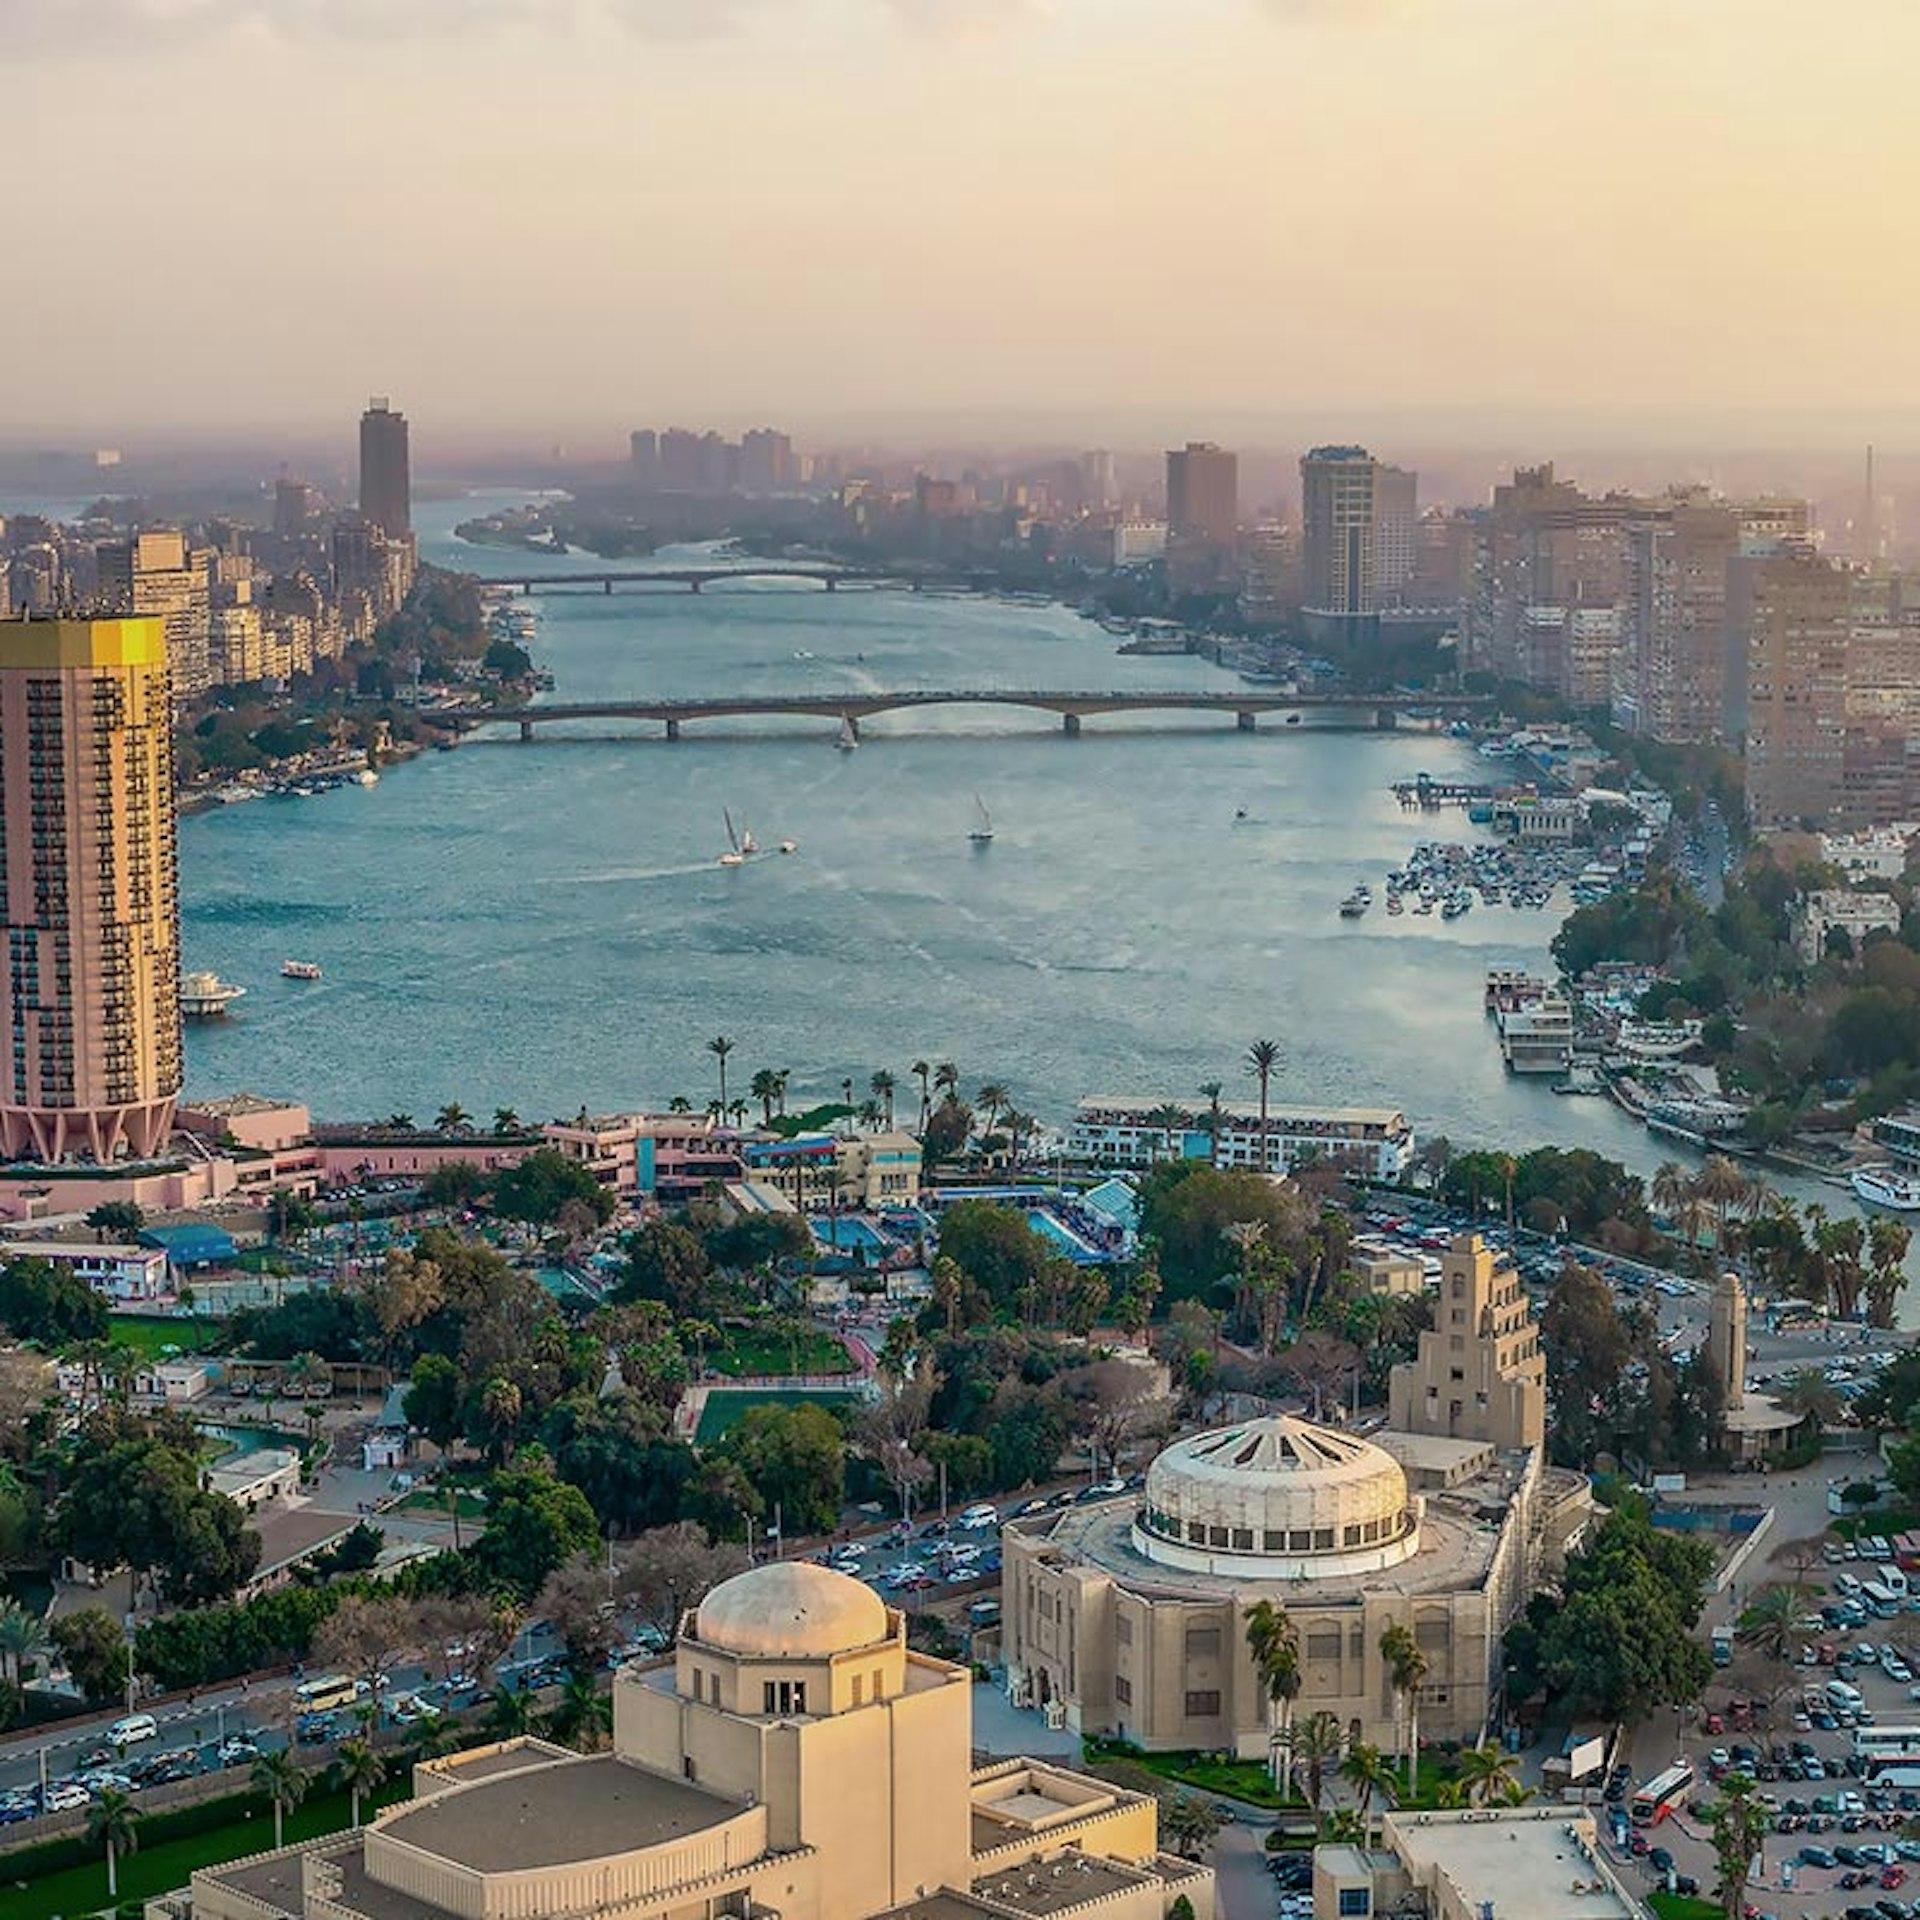 Get the latest news and updates on e-invoicing, e-ordering, e-archiving and indirect tax regulatory requirements for Egypt.